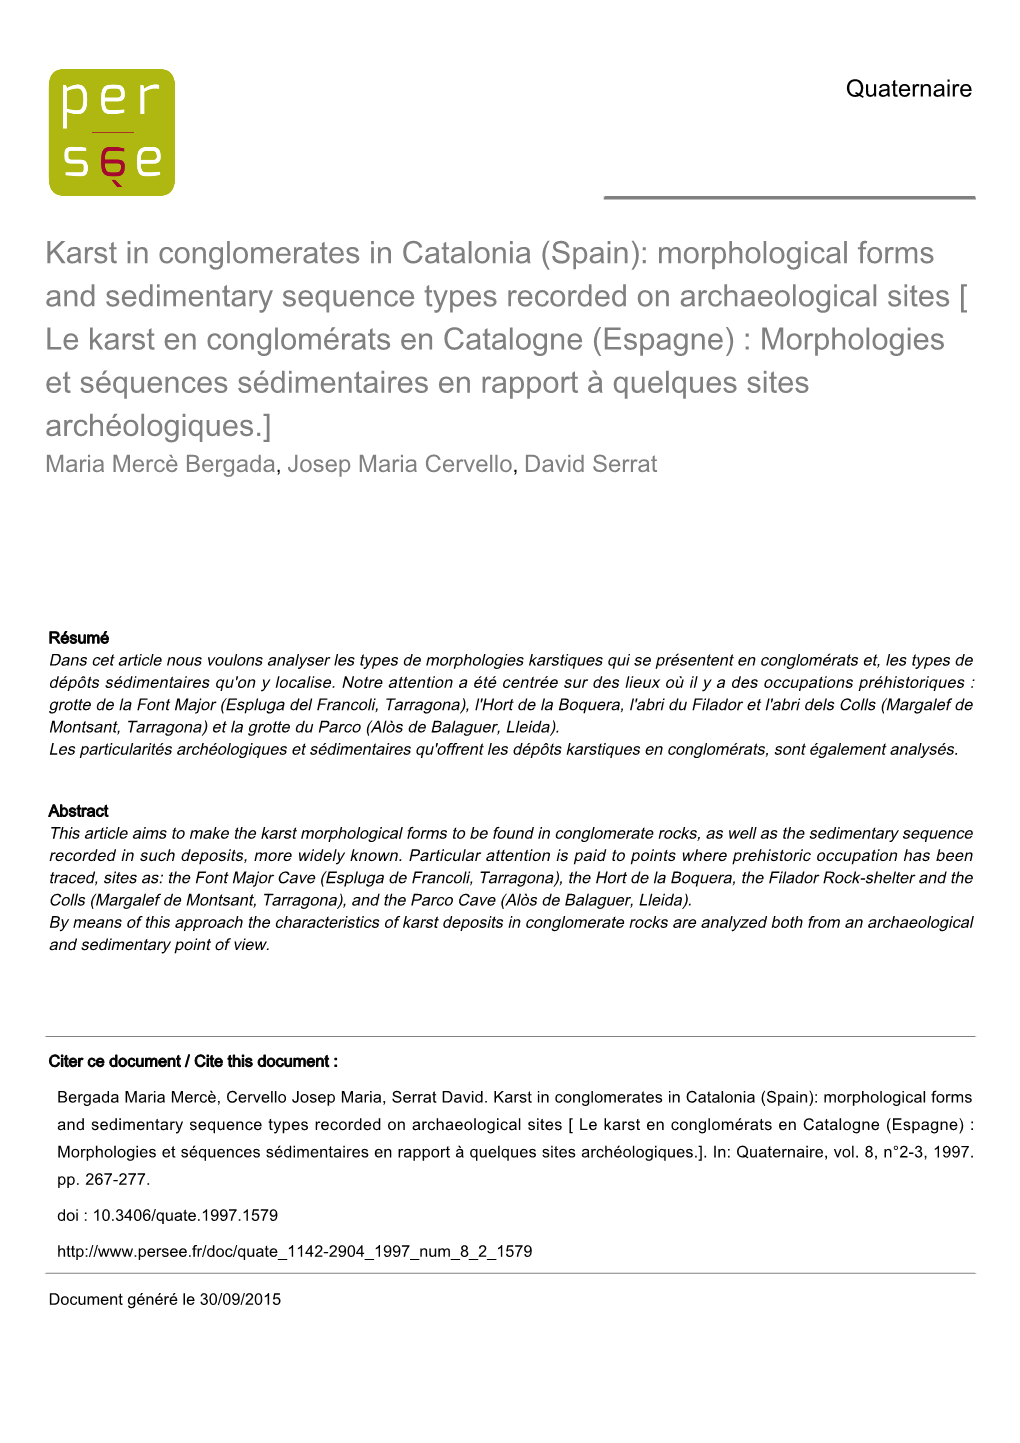 Karst in Conglomerates in Catalonia